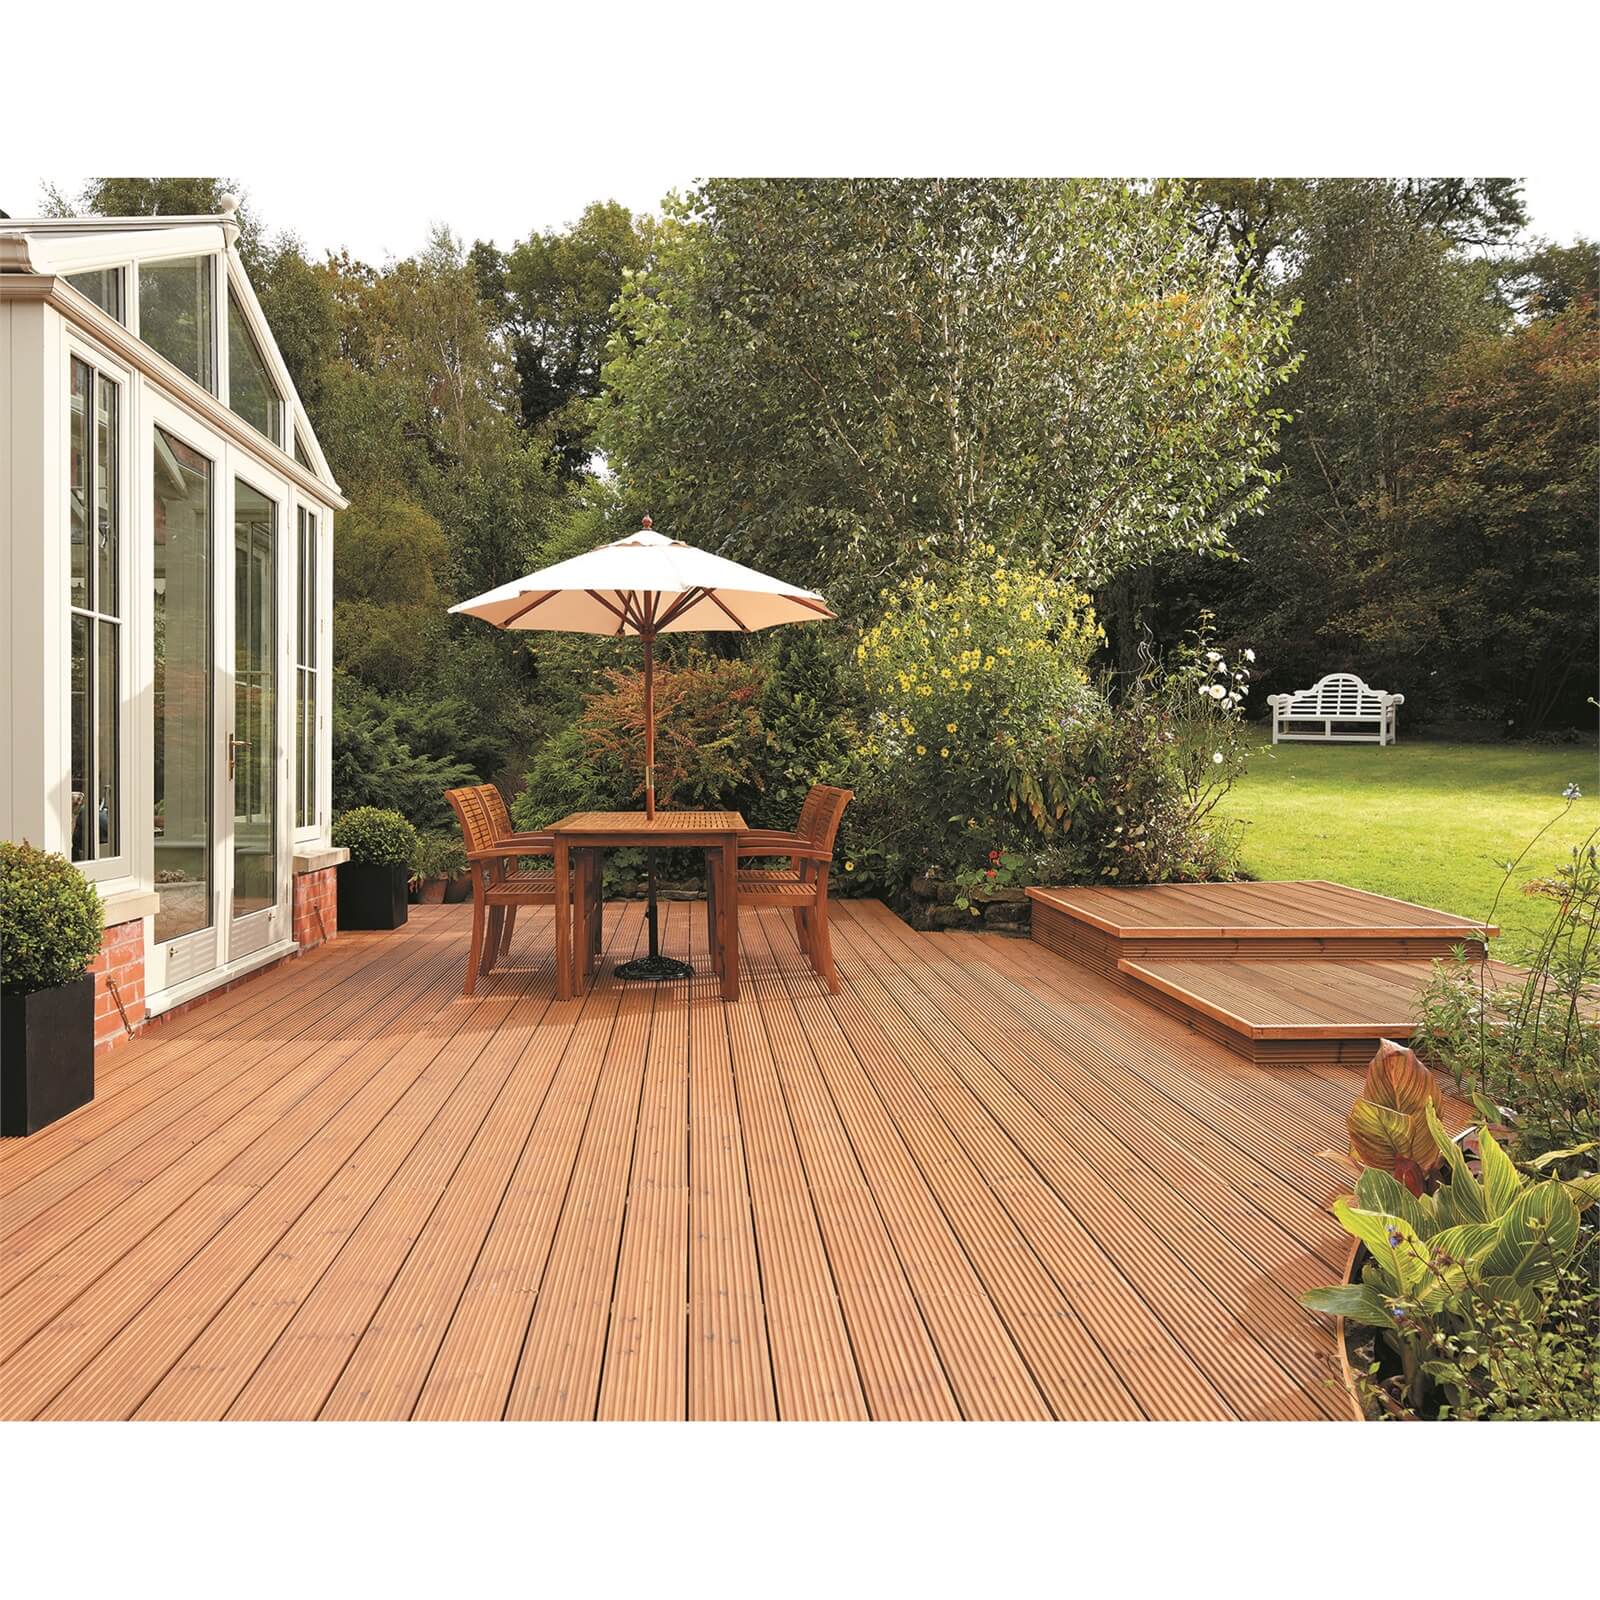 Ronseal Ultimate Protection Decking Stain Country Oak - 5L